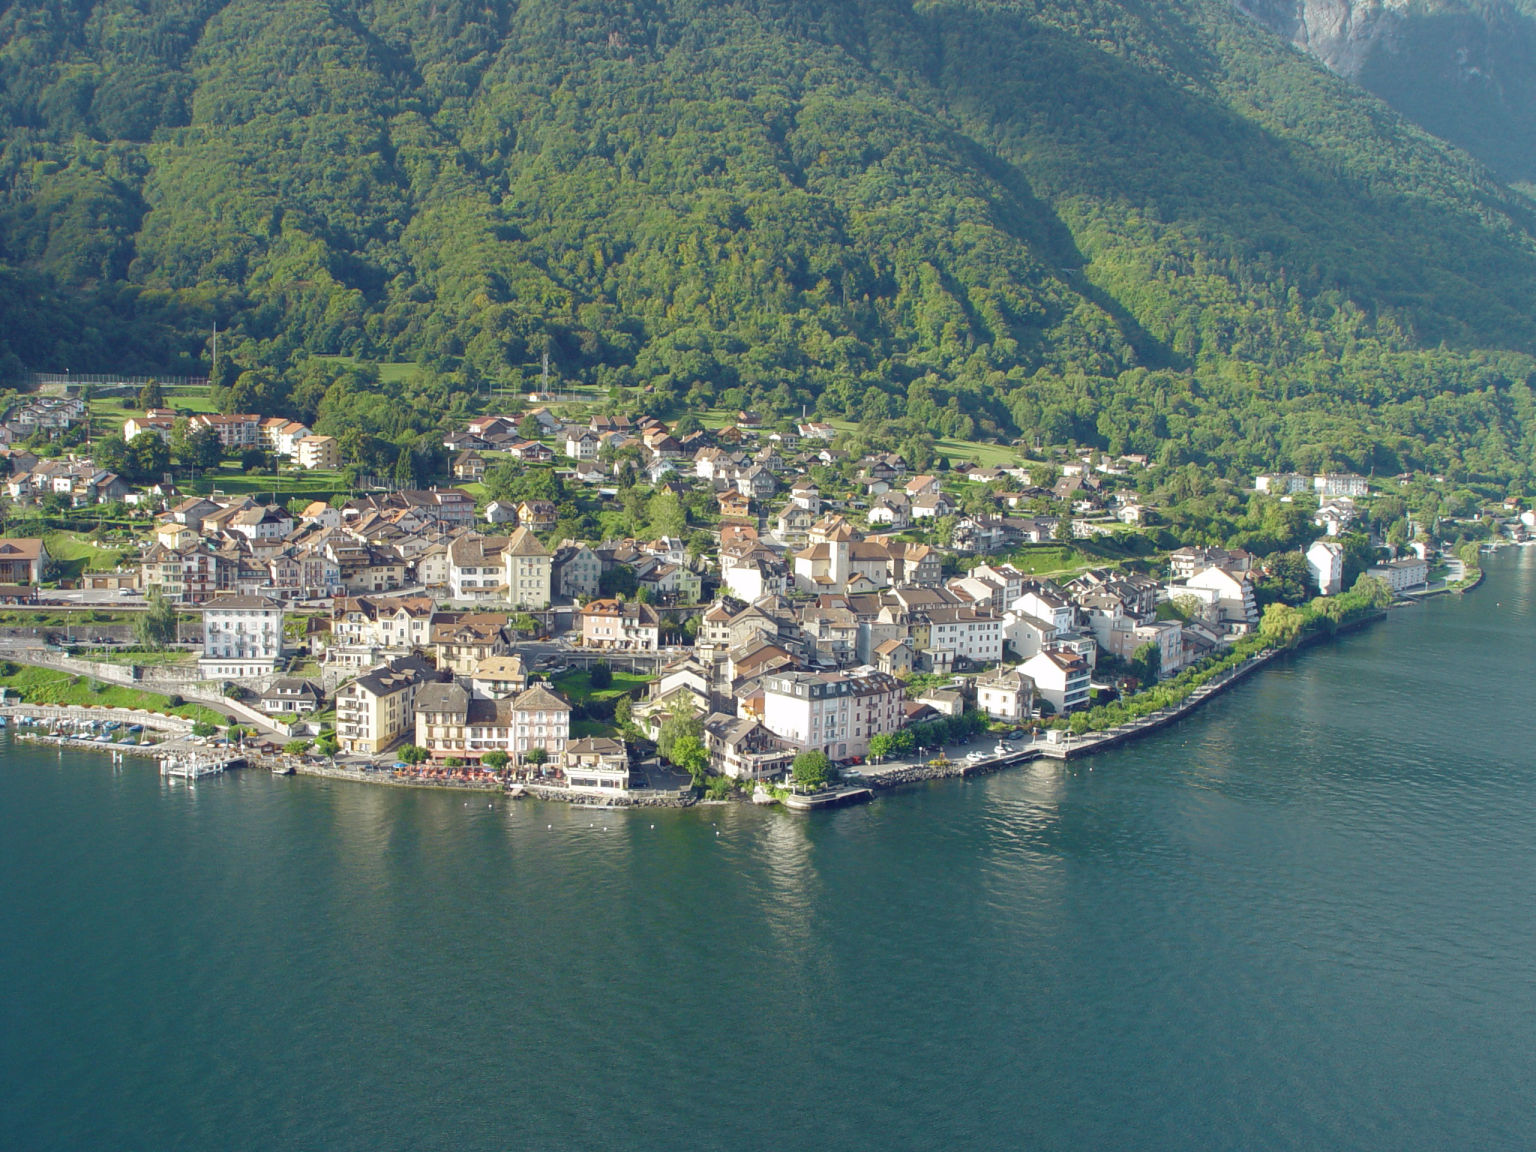 The village St-Gingolph next to the lake Geneva during summer, Valais